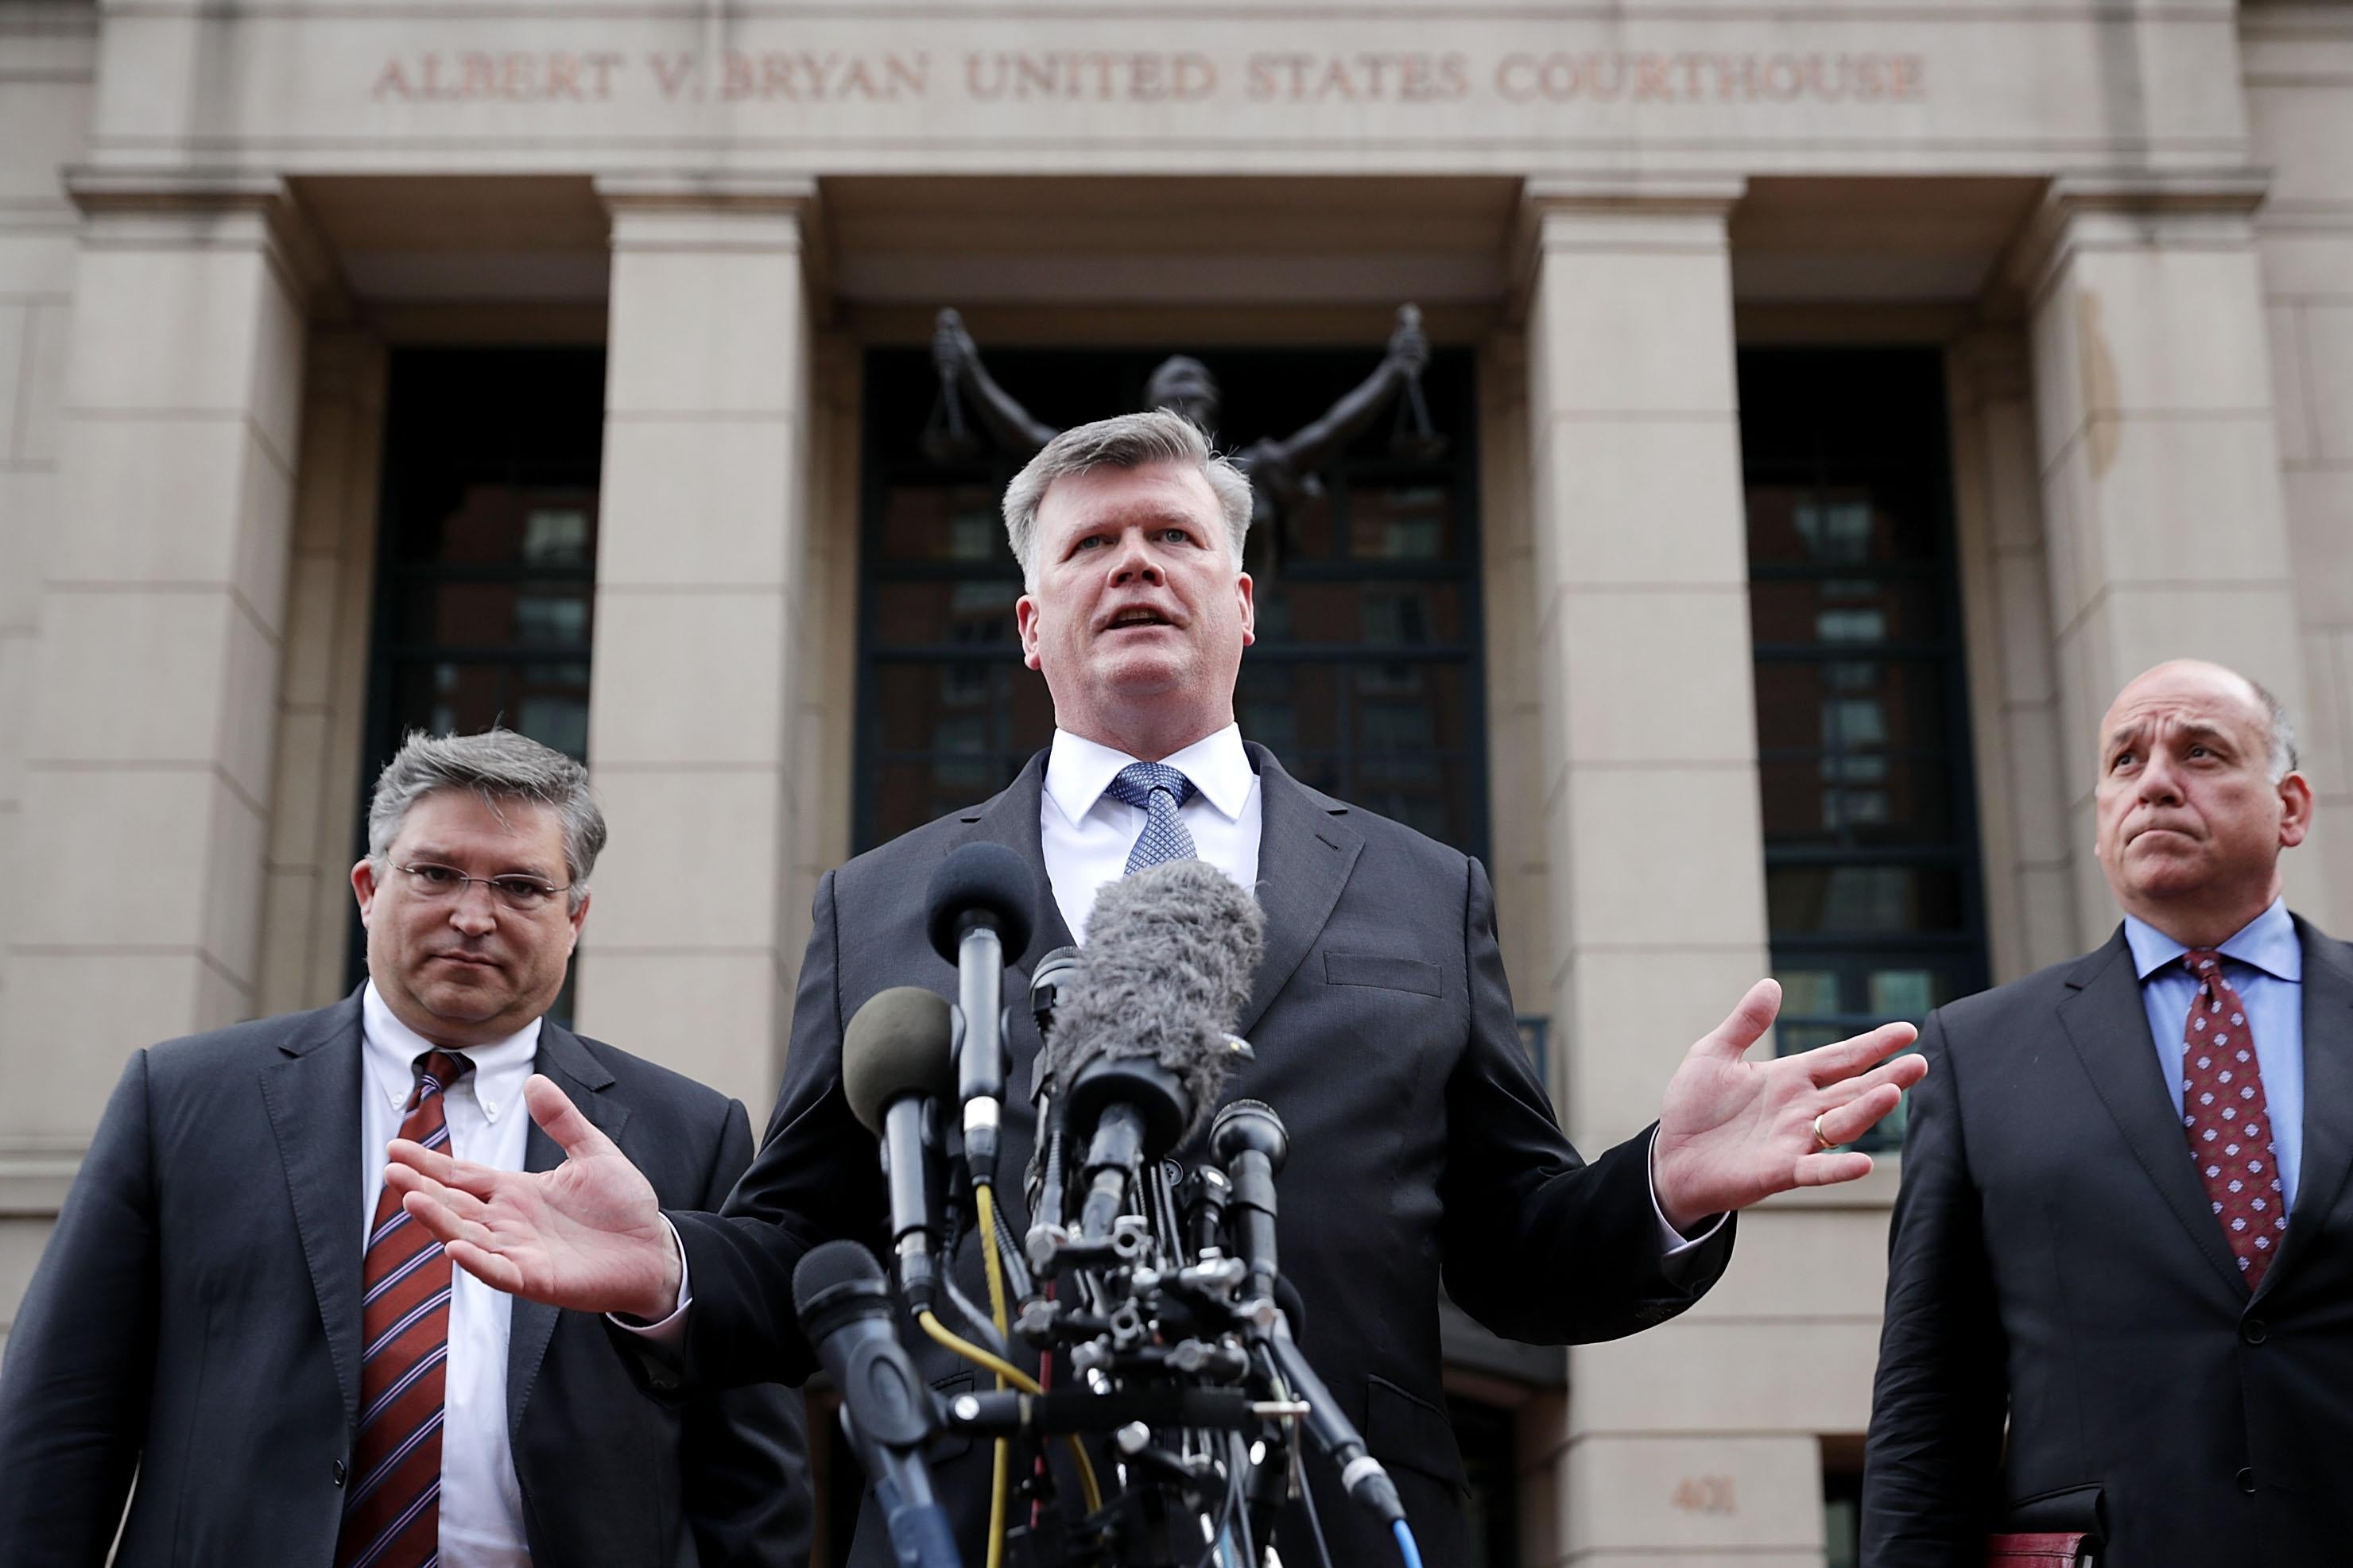 Kevin Downing, a lawyer for Paul Manafort, speaks to reporters outside the courthouse after the jury announced a verdict August 21, 2018 in Alexandria, Virginia. 